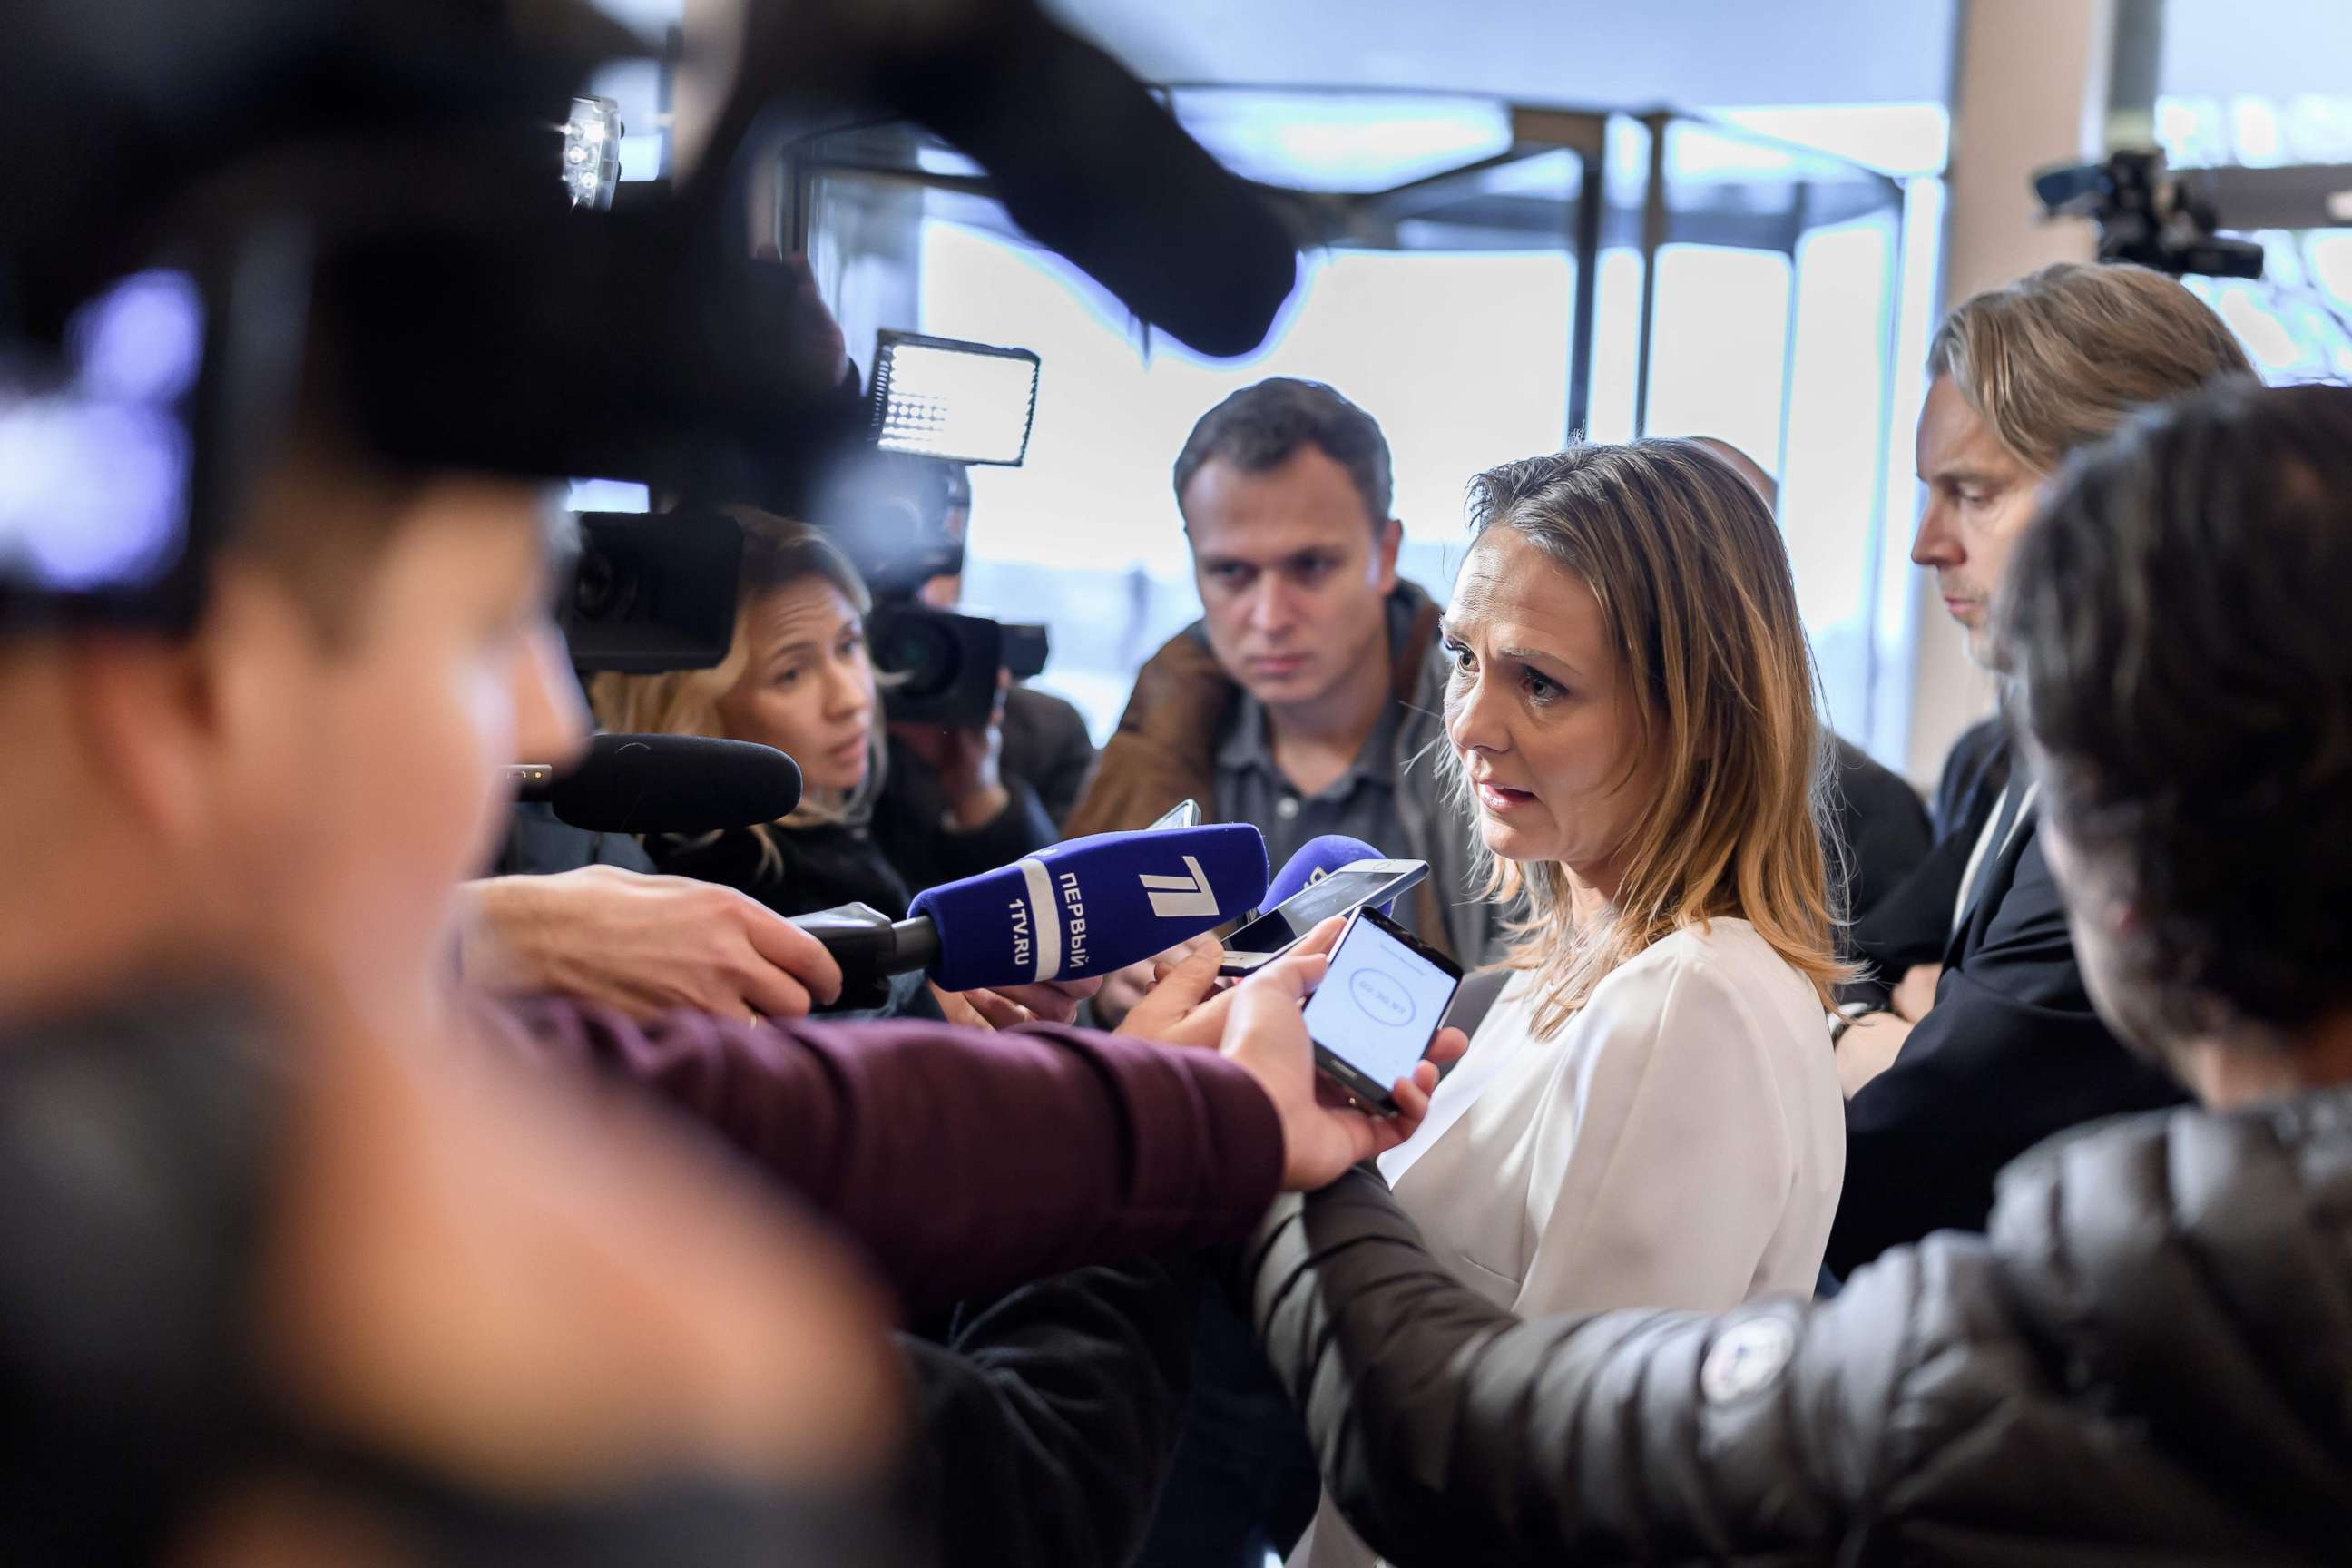 PHOTO: Norway's Linda Hofstad Helleland, a member of the World Anti-Doping Agency (WADA) foundation board, answers journalists following a meeting of WADA's executive committee on Dec. 9, 2019 in Lausanne. (Photo by FABRICE COFFRINI/AFP via Getty Images)